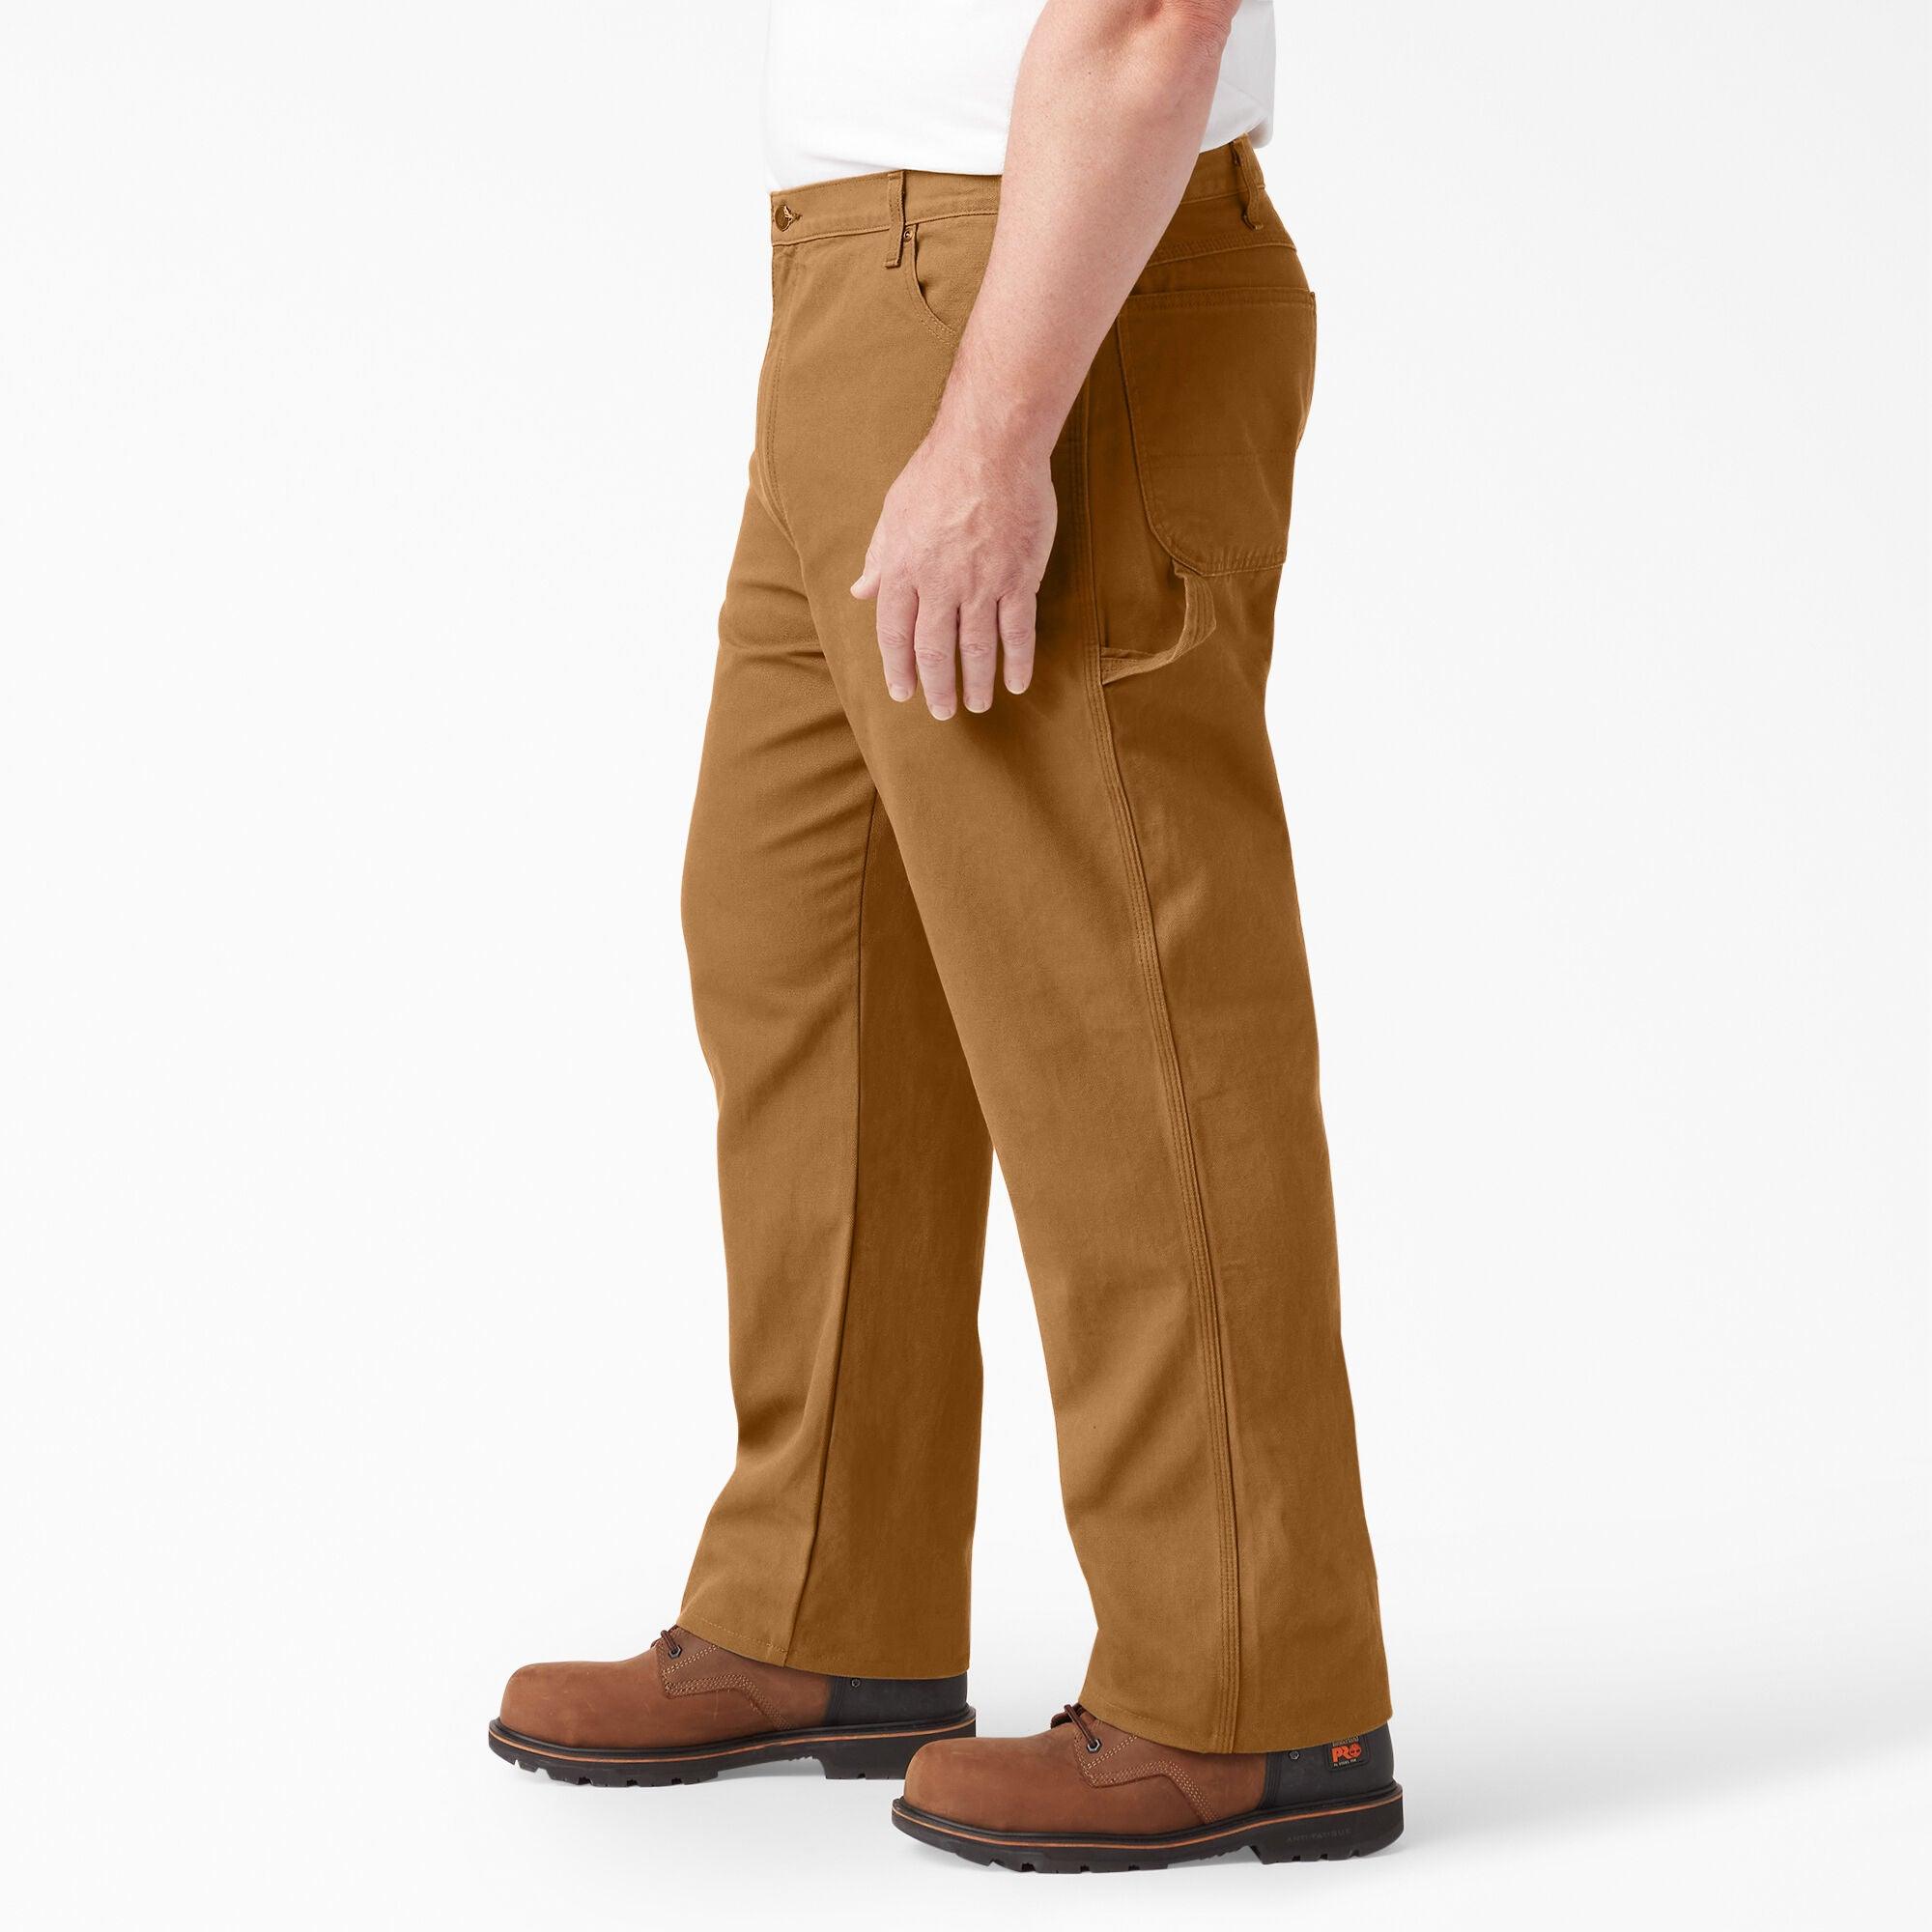 Relaxed Fit Heavyweight Duck Carpenter Pants, Brown Duck - Purpose-Built / Home of the Trades